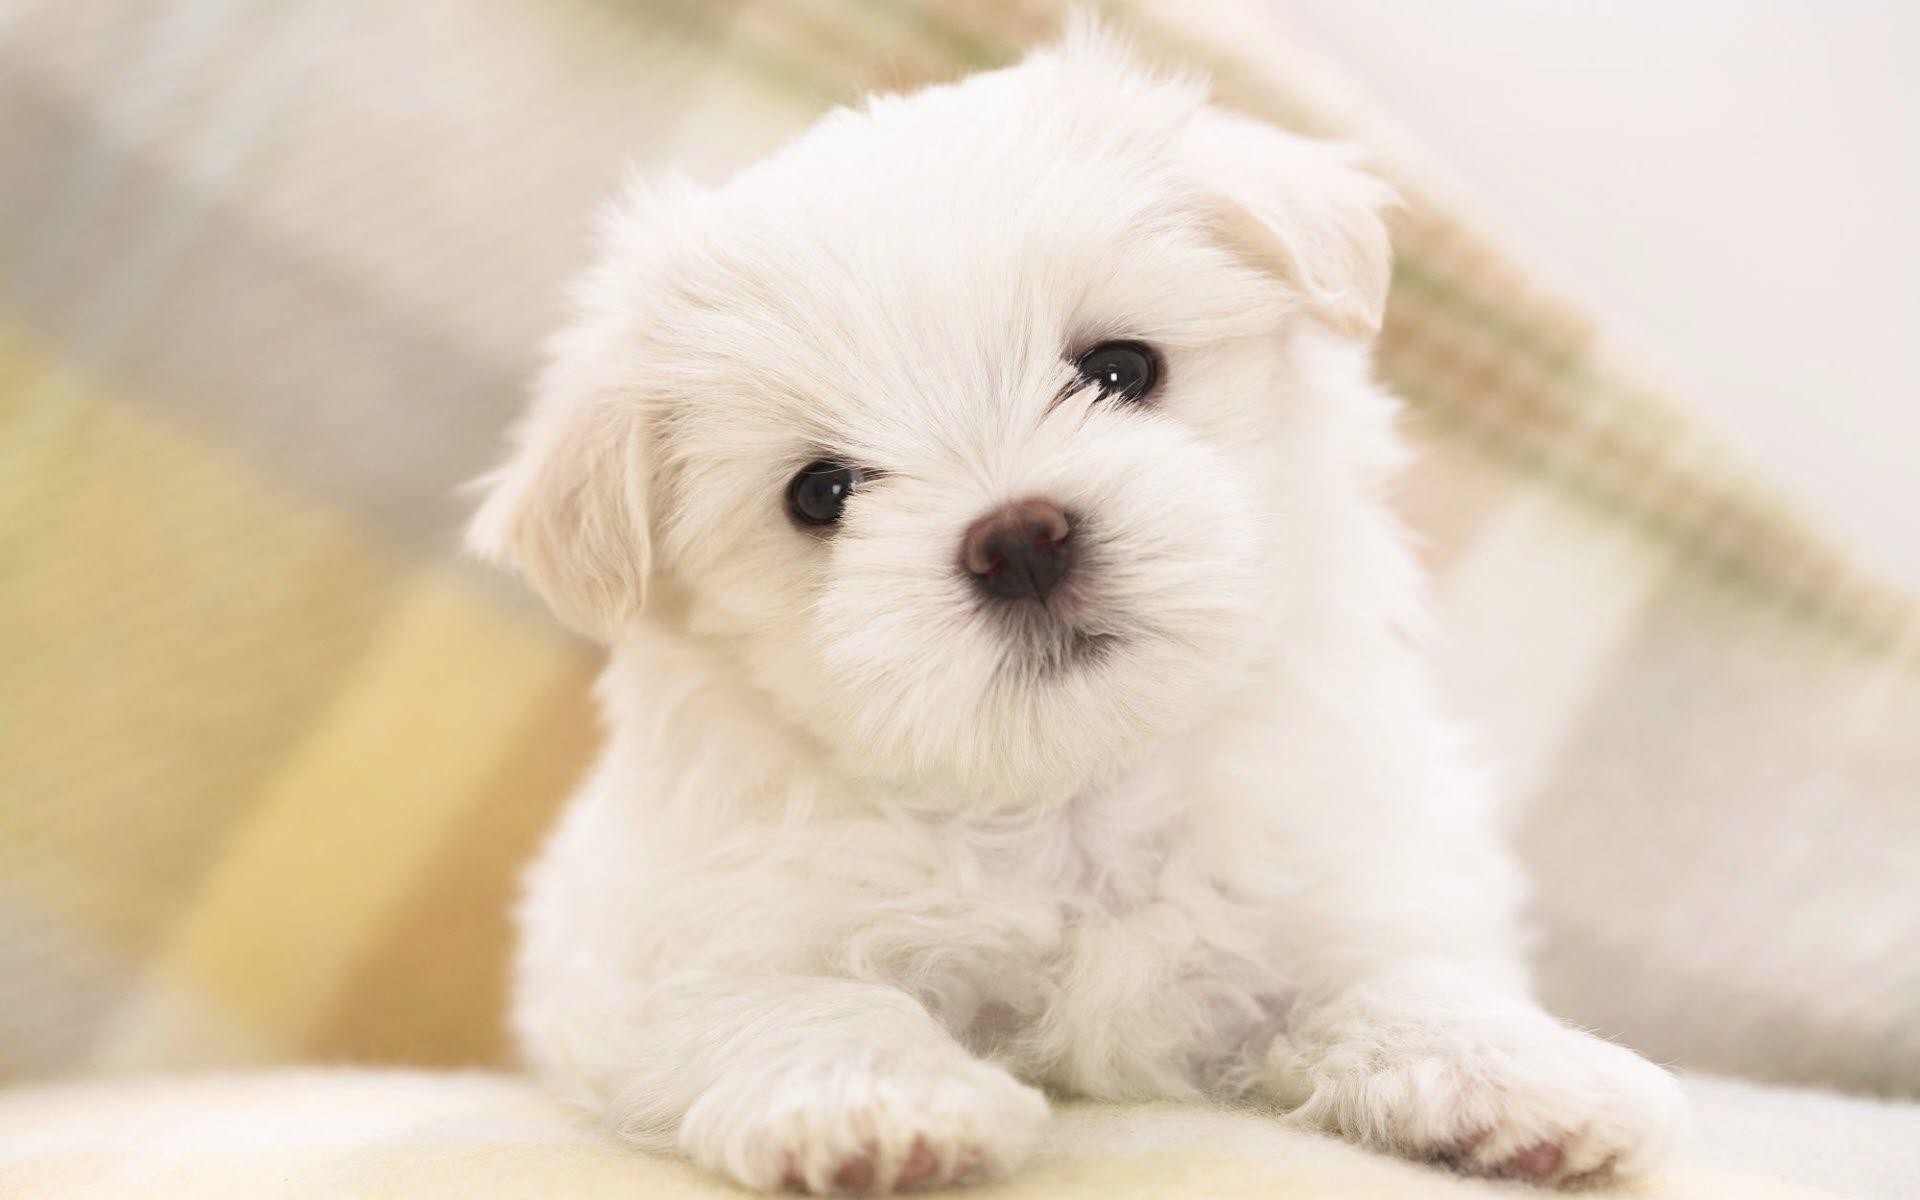 51 Wallpapers of Cute Puppies